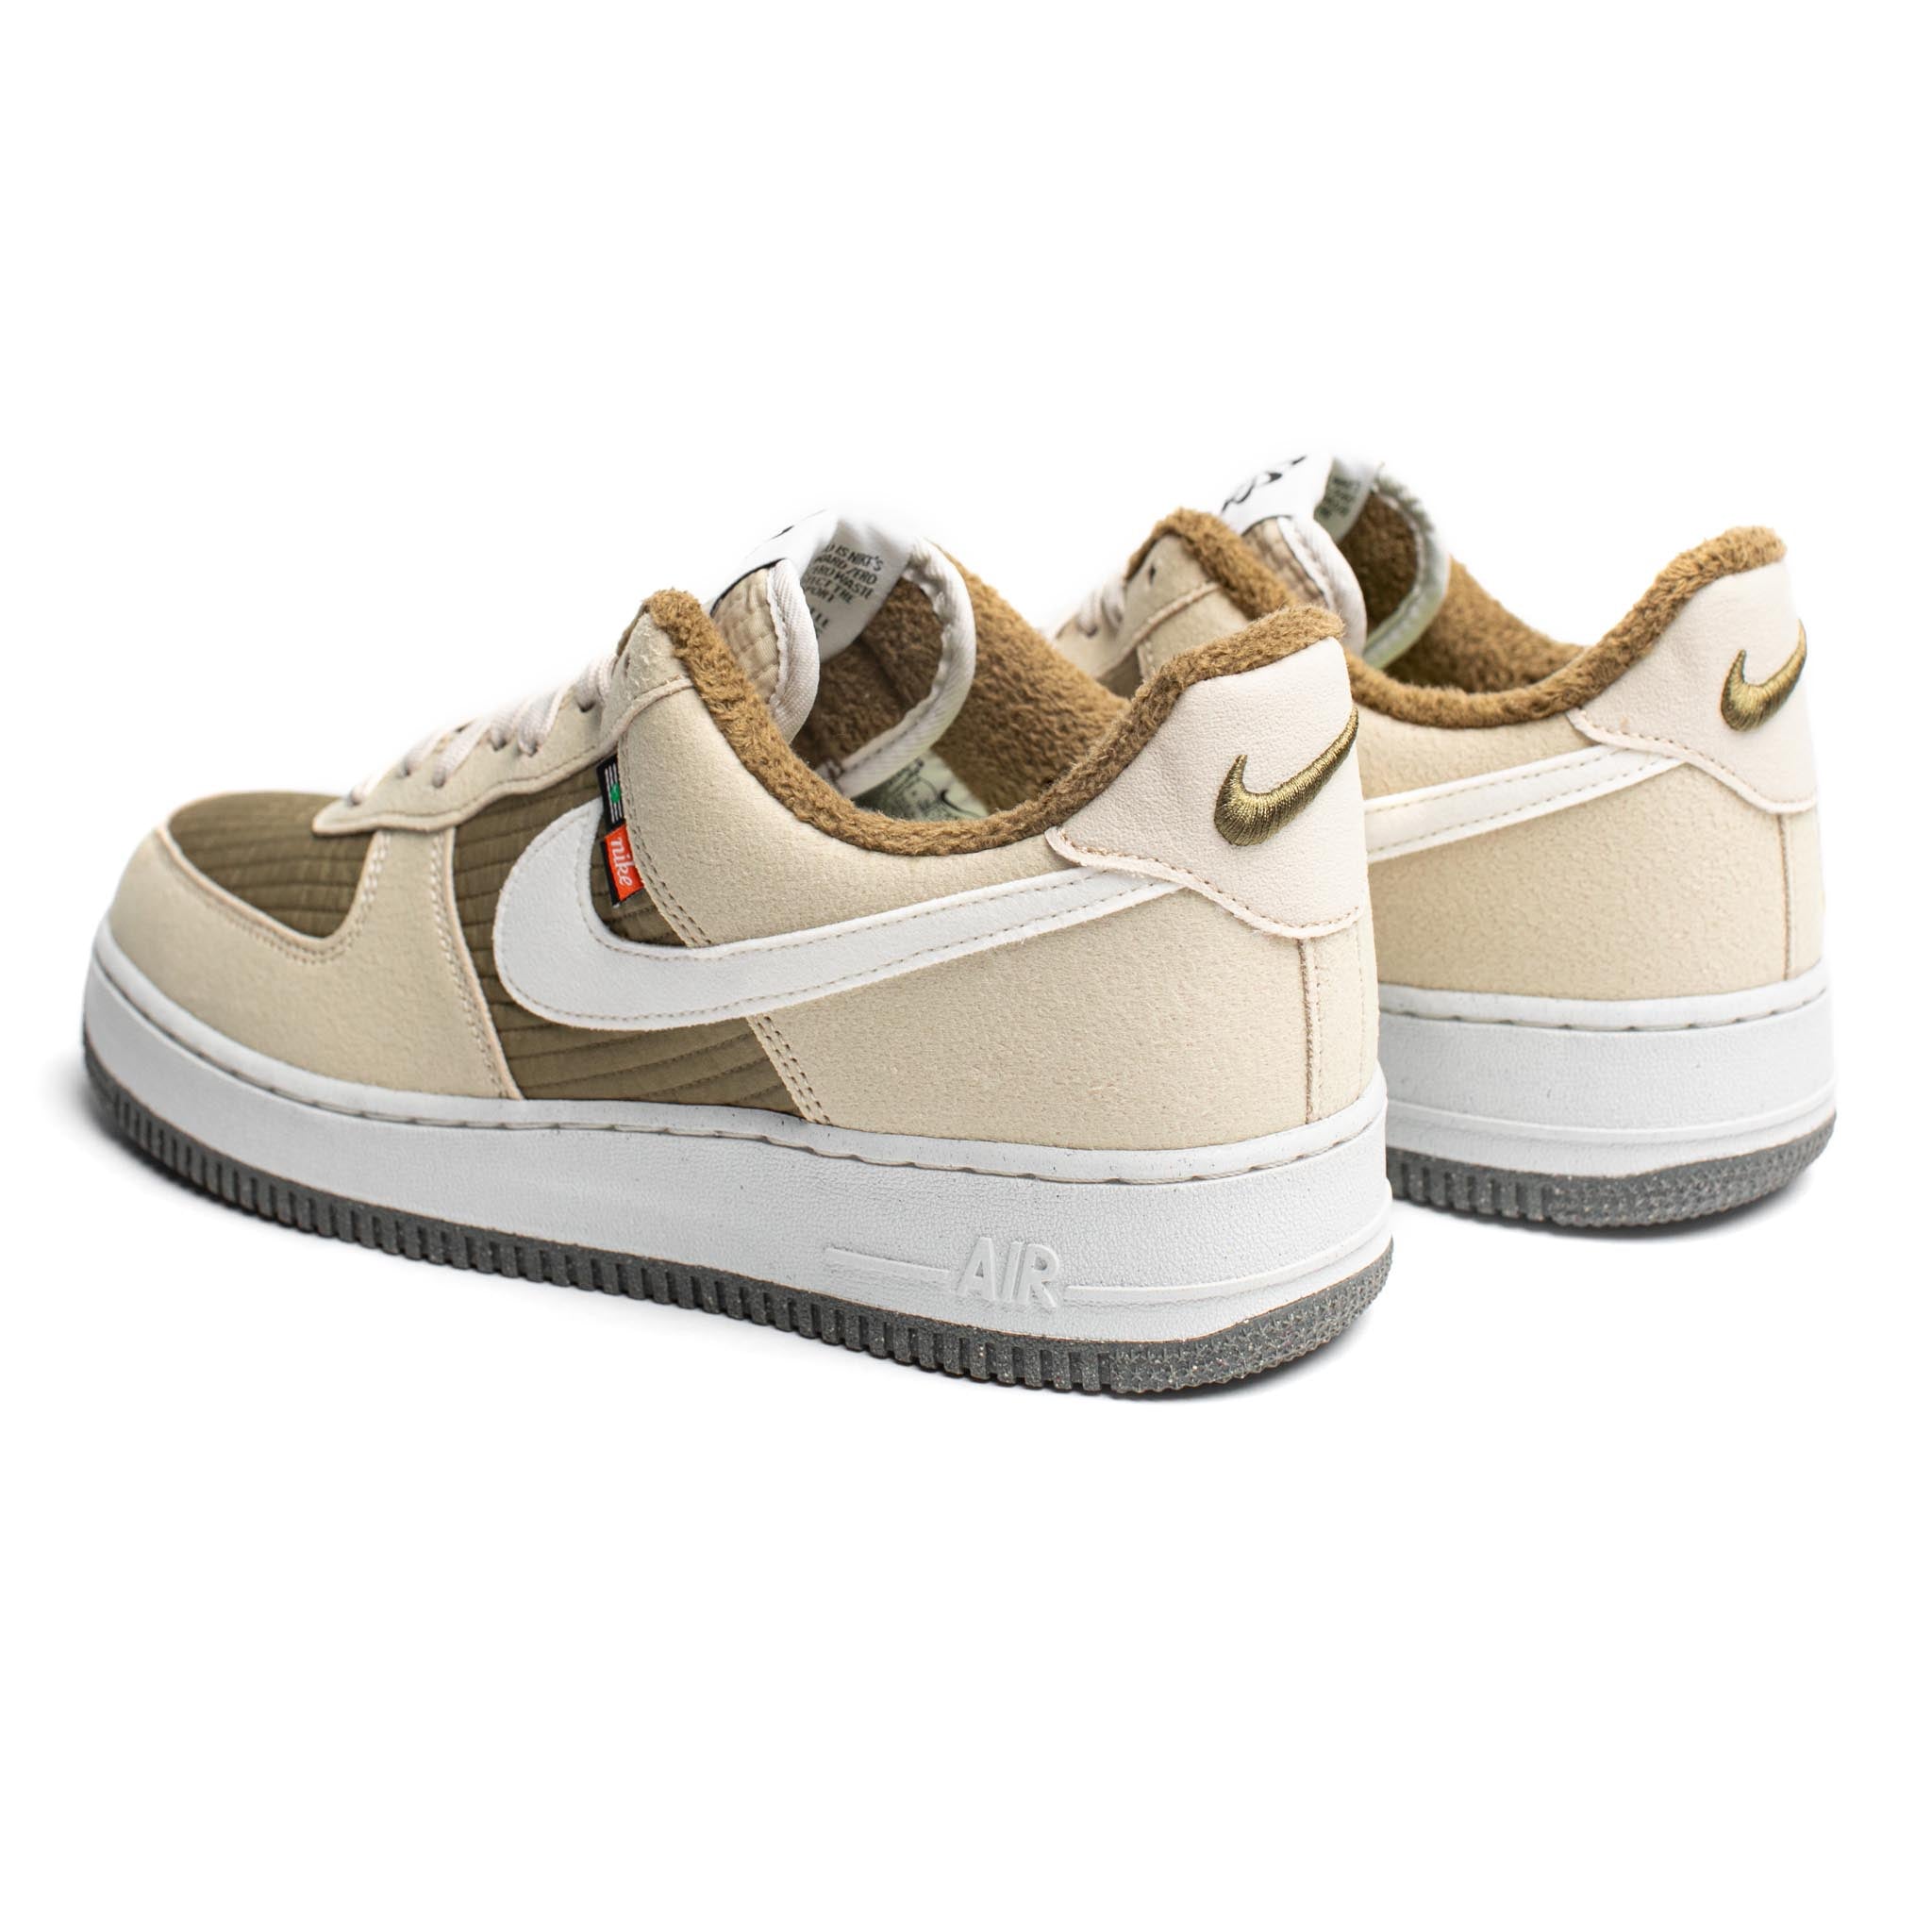 NIKE AIR FORCE ONE '07 LV8 **TOASTY** DC8871-200 SIZE 7.5 NEW IN BOX NO LID